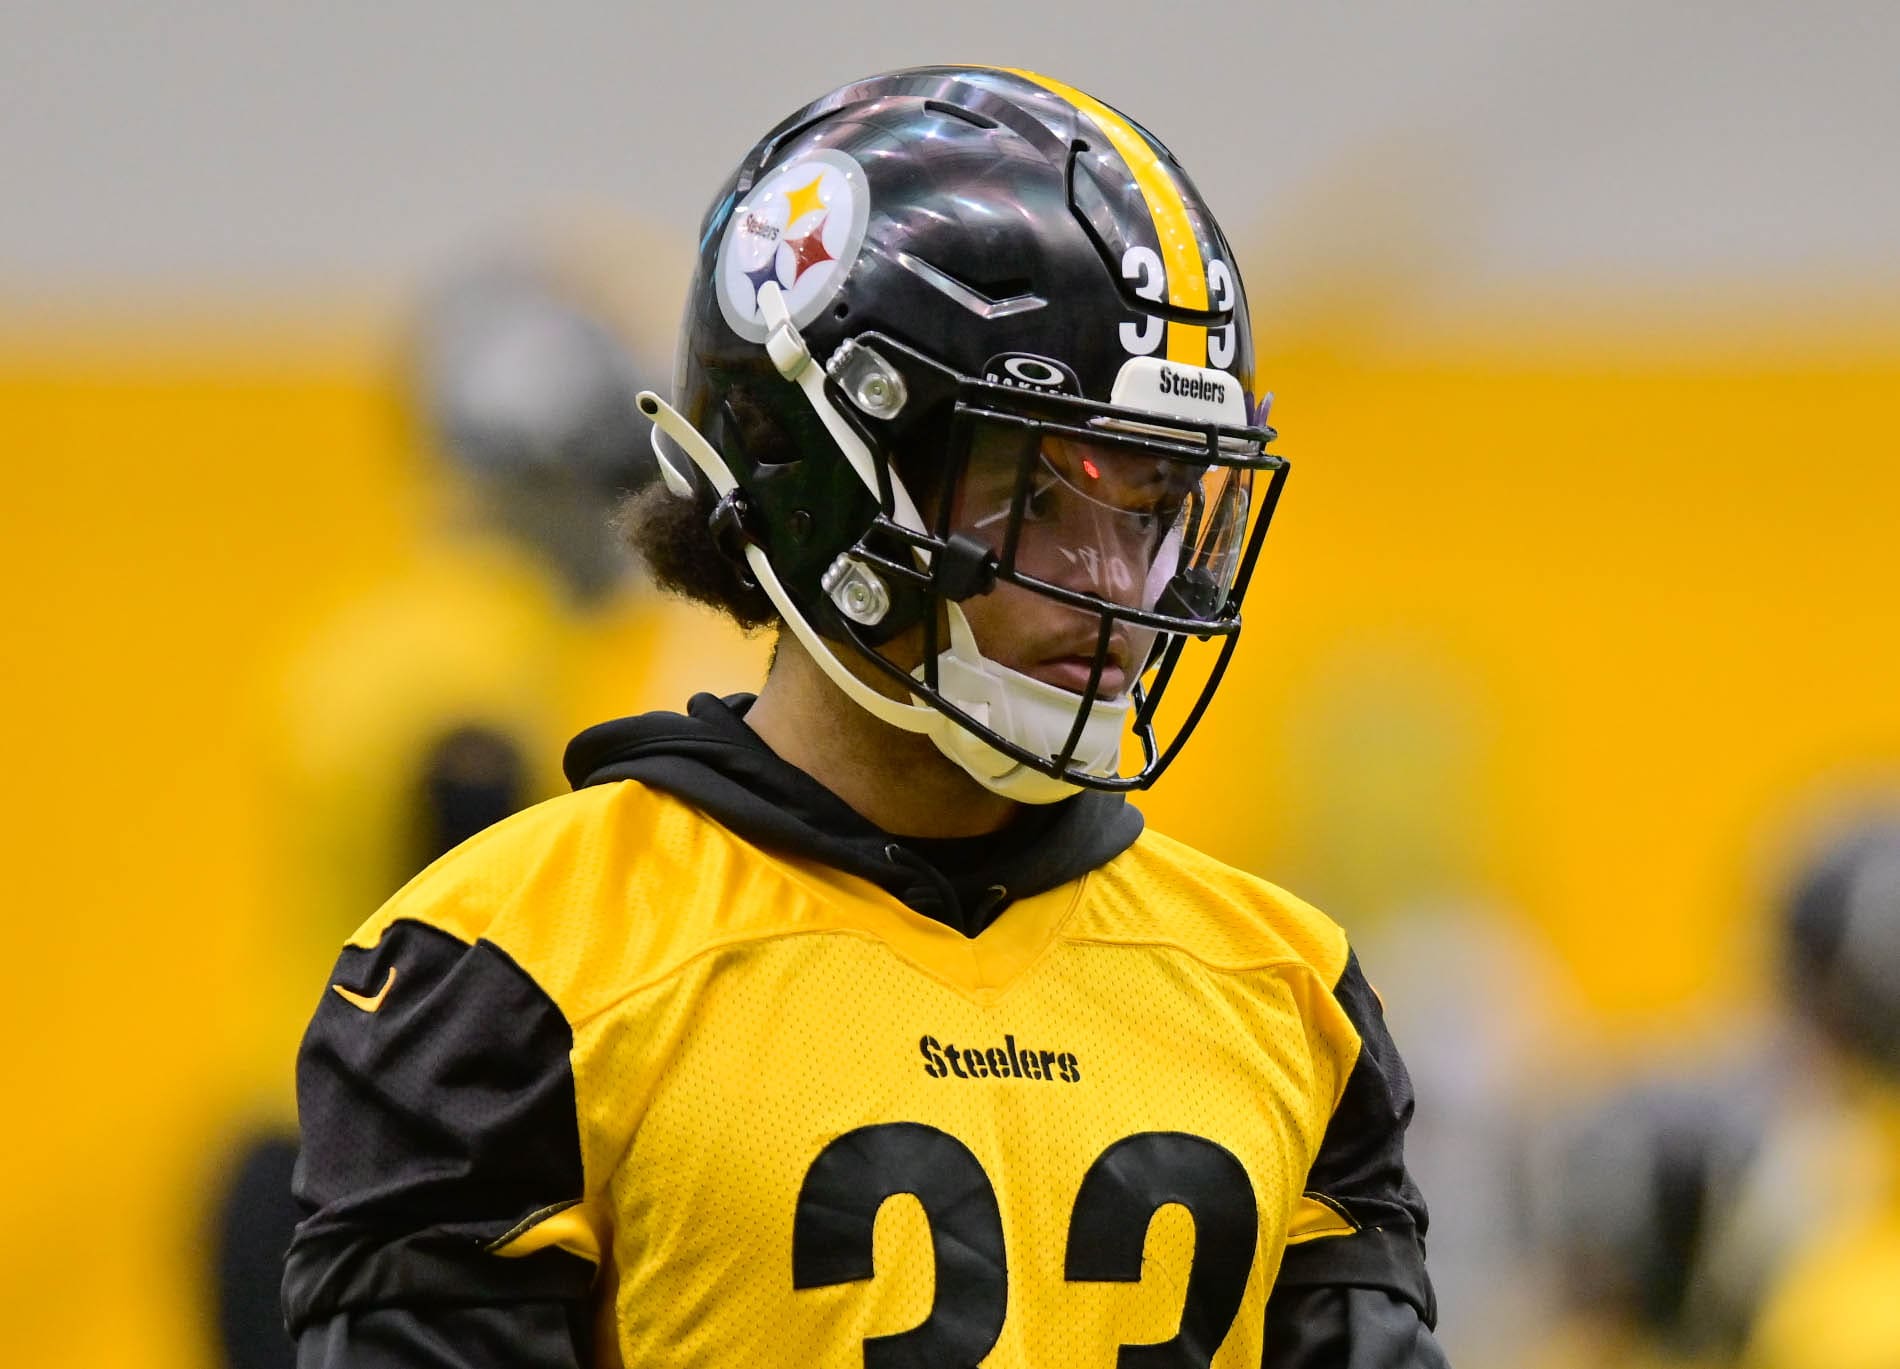 Steelers safety Nate Meadors